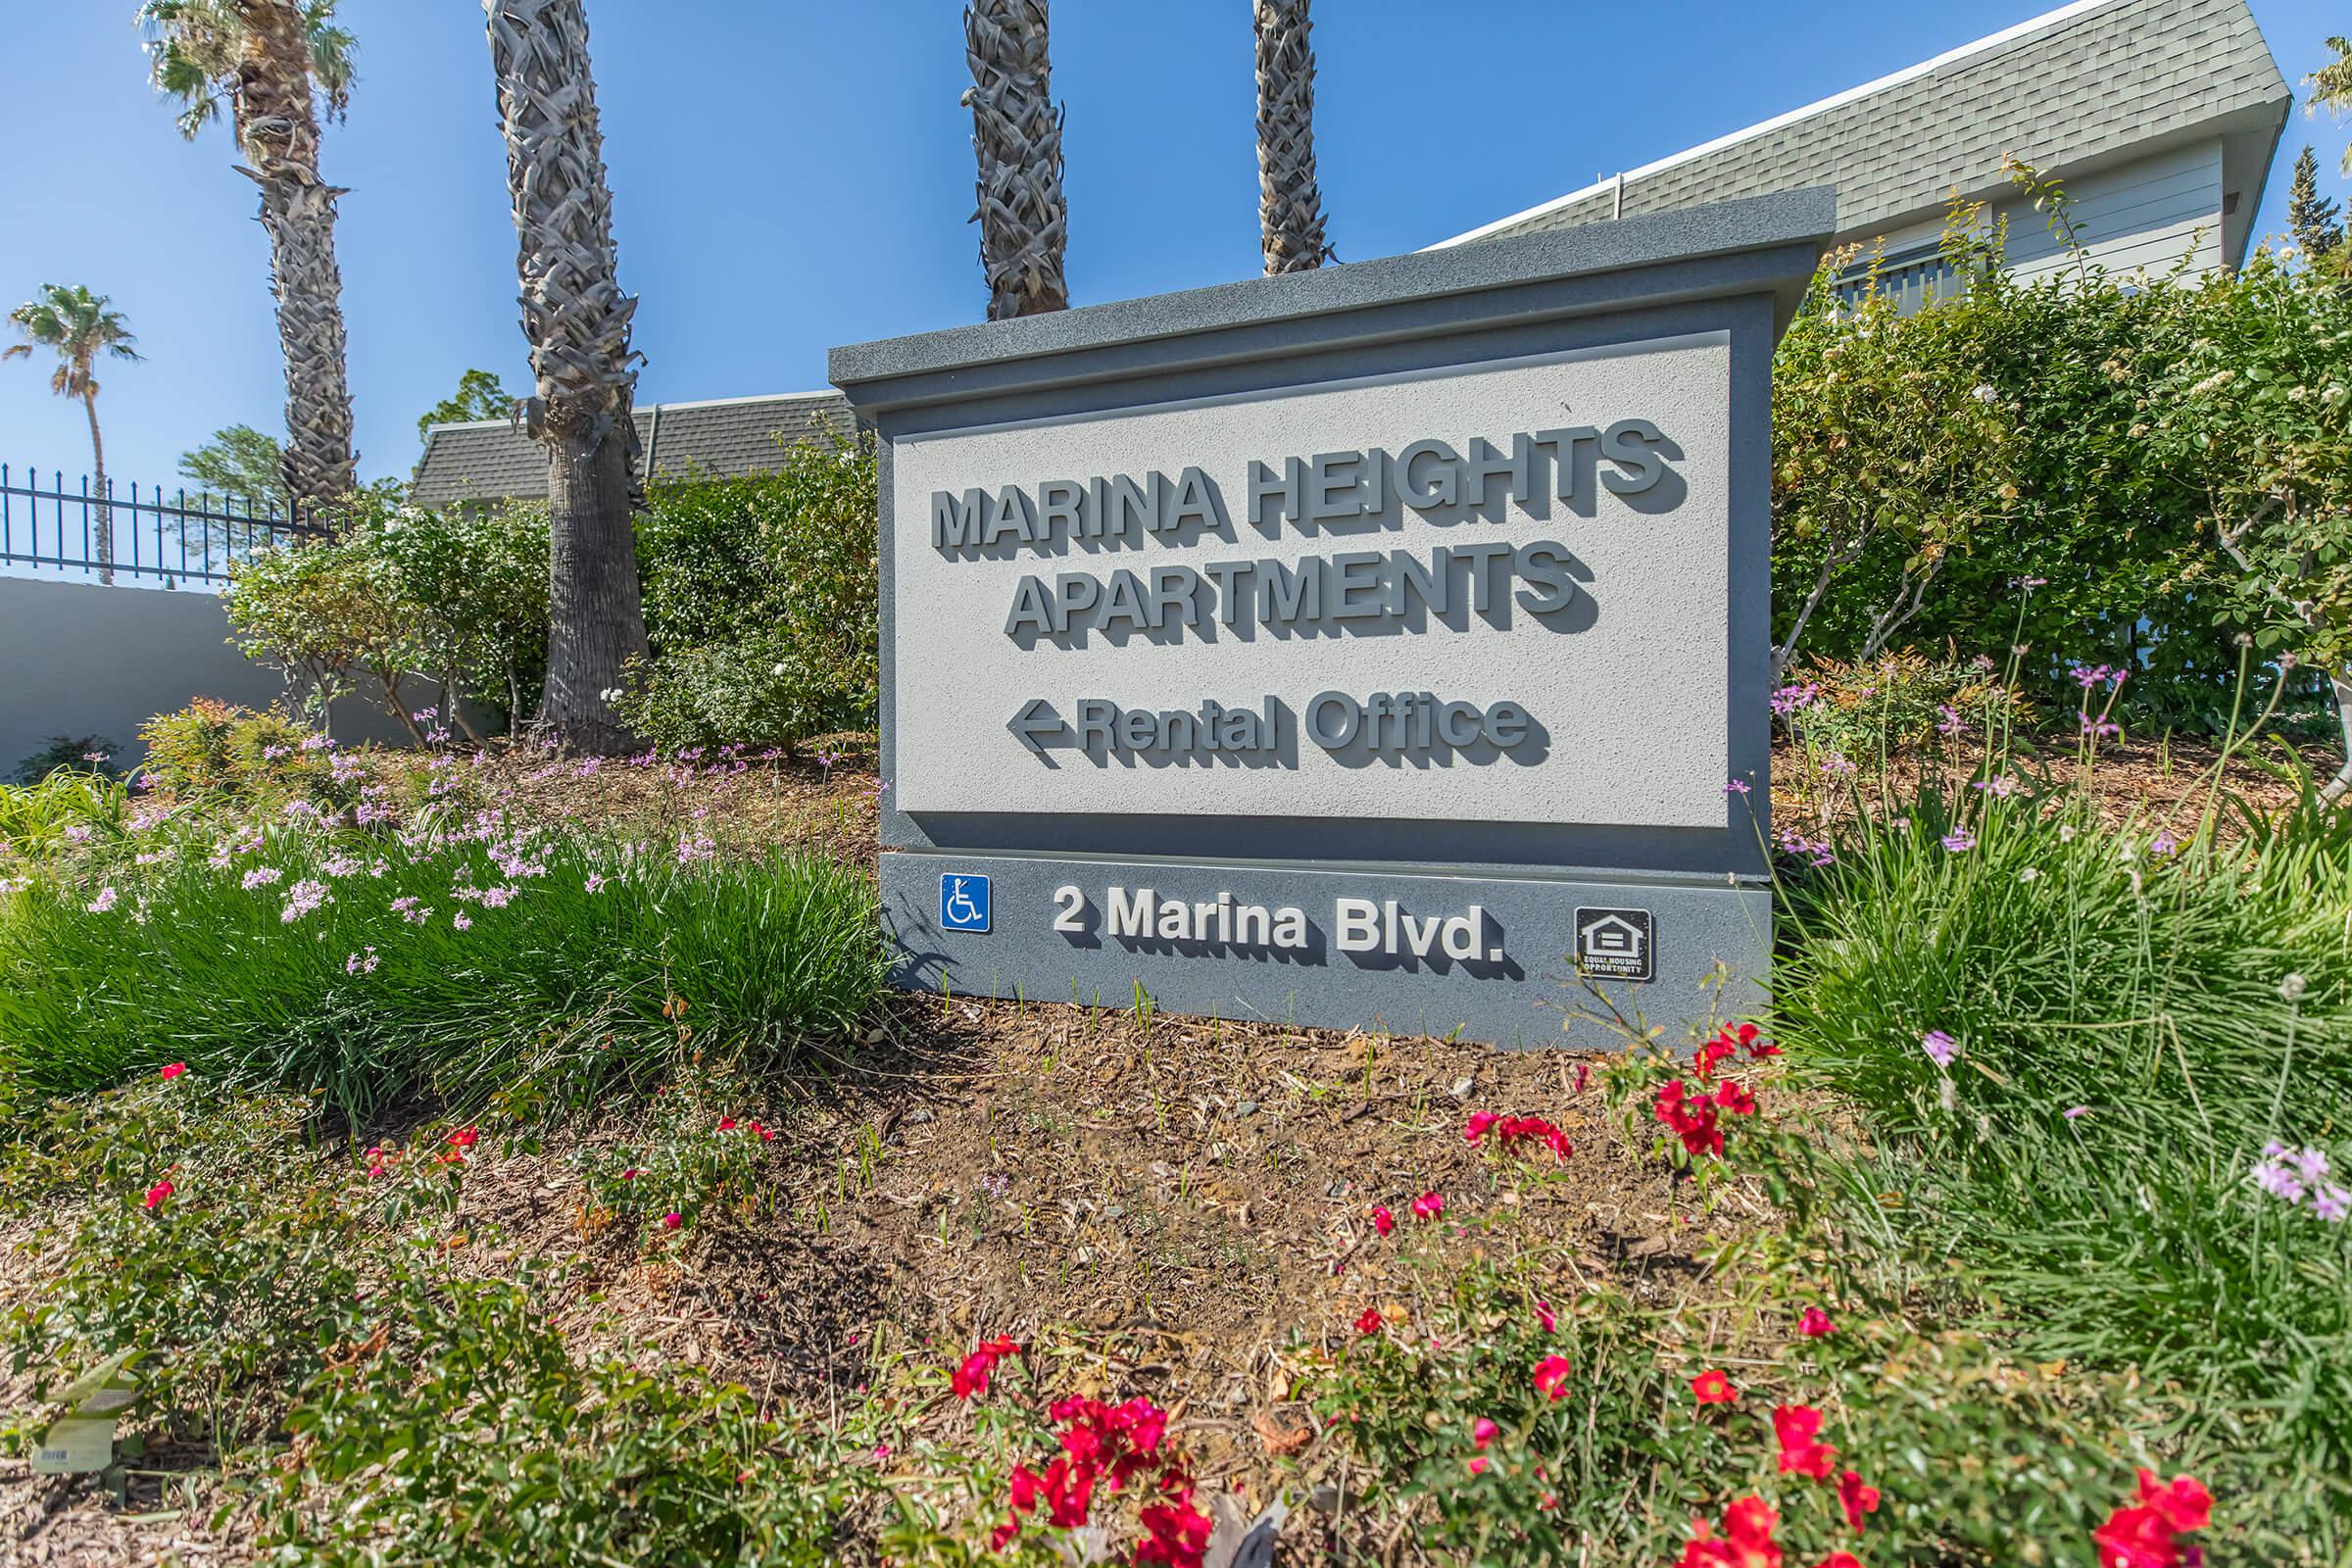 Marina Heights Apartments monument sign